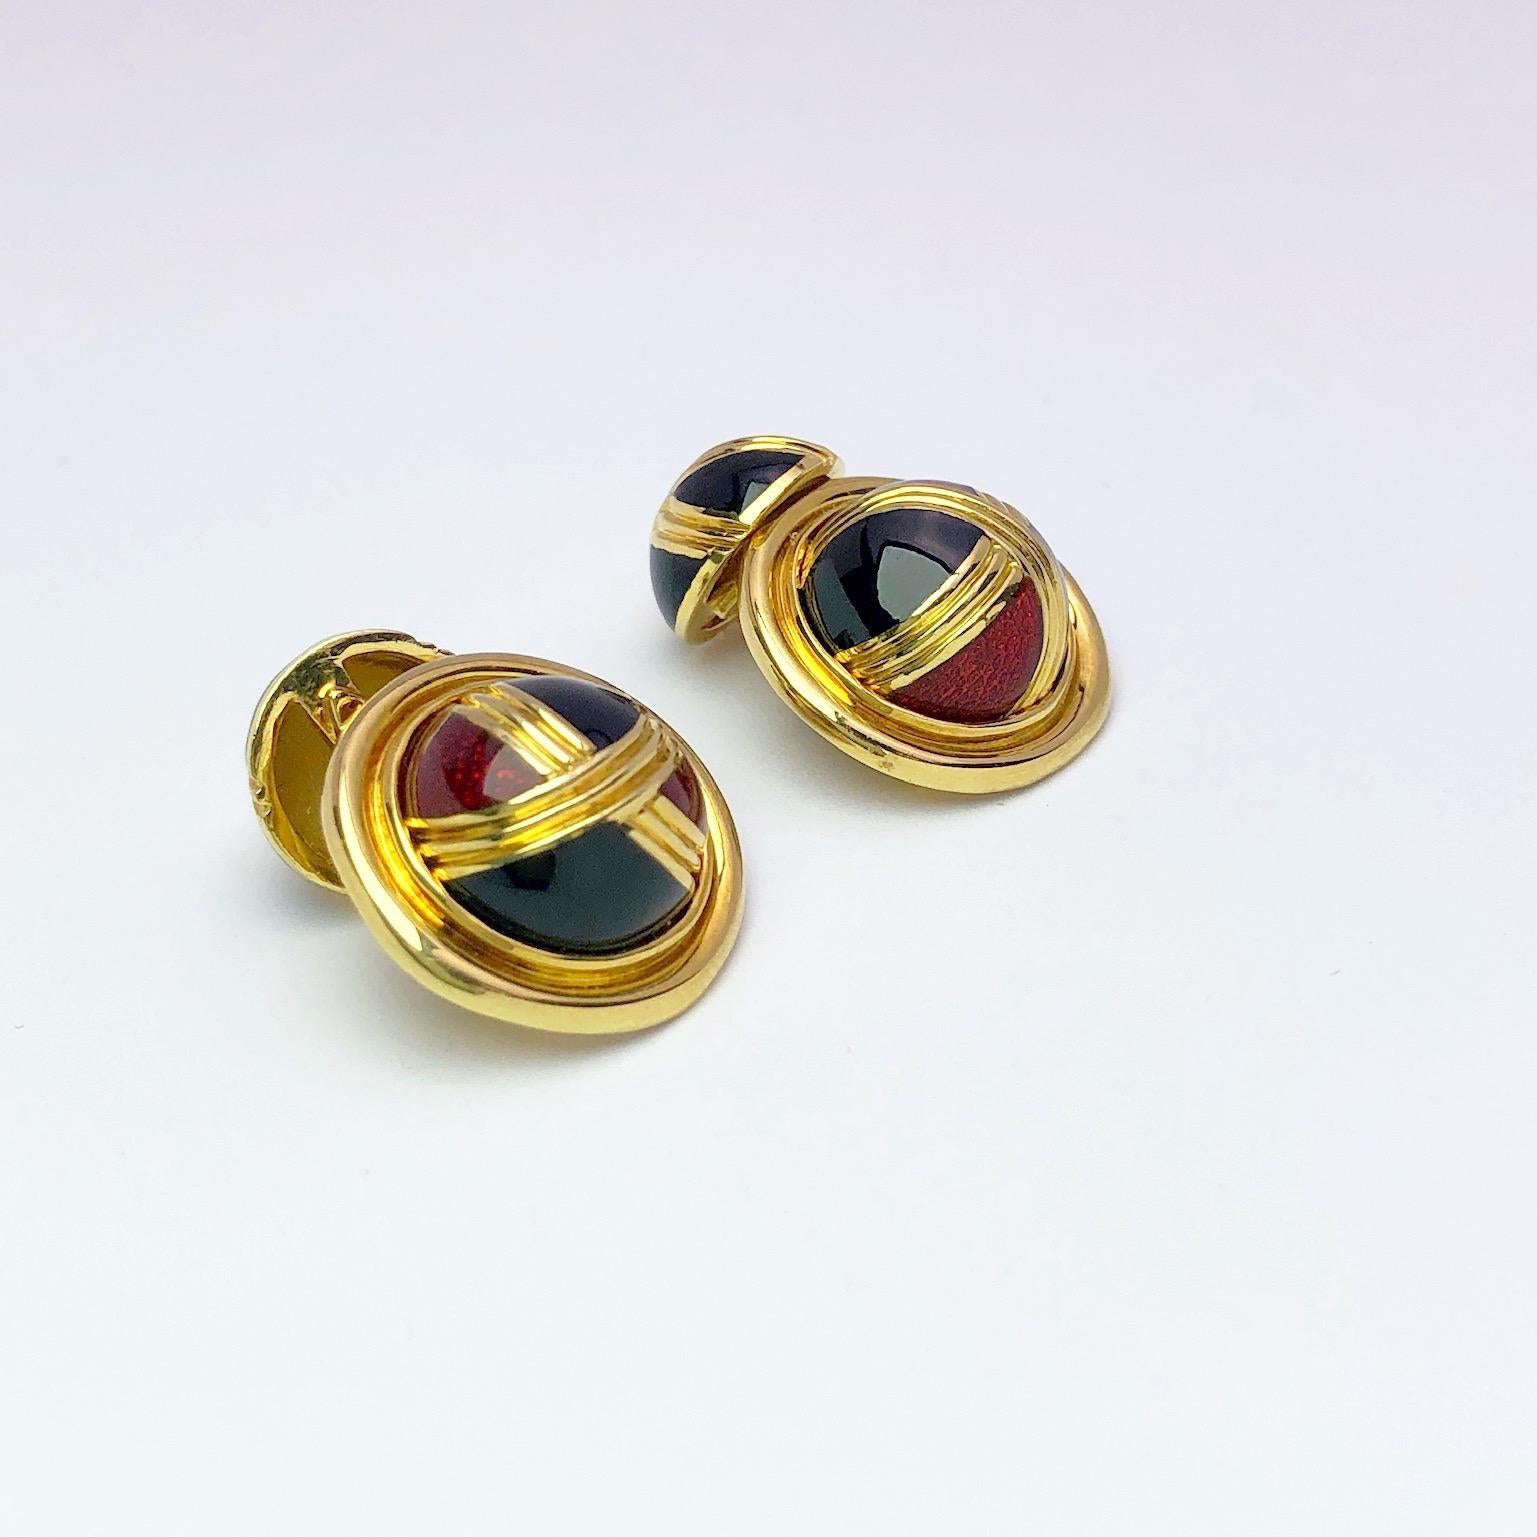 Designed for Cellini Jewelers NYC these 18 karat yellow gold cufflinks are enameled in burgundy and black with gold detailing.  These are the chain style cufflinks with smaller enameled domed backs.
Stamped Cellini 750 along with the jewelers